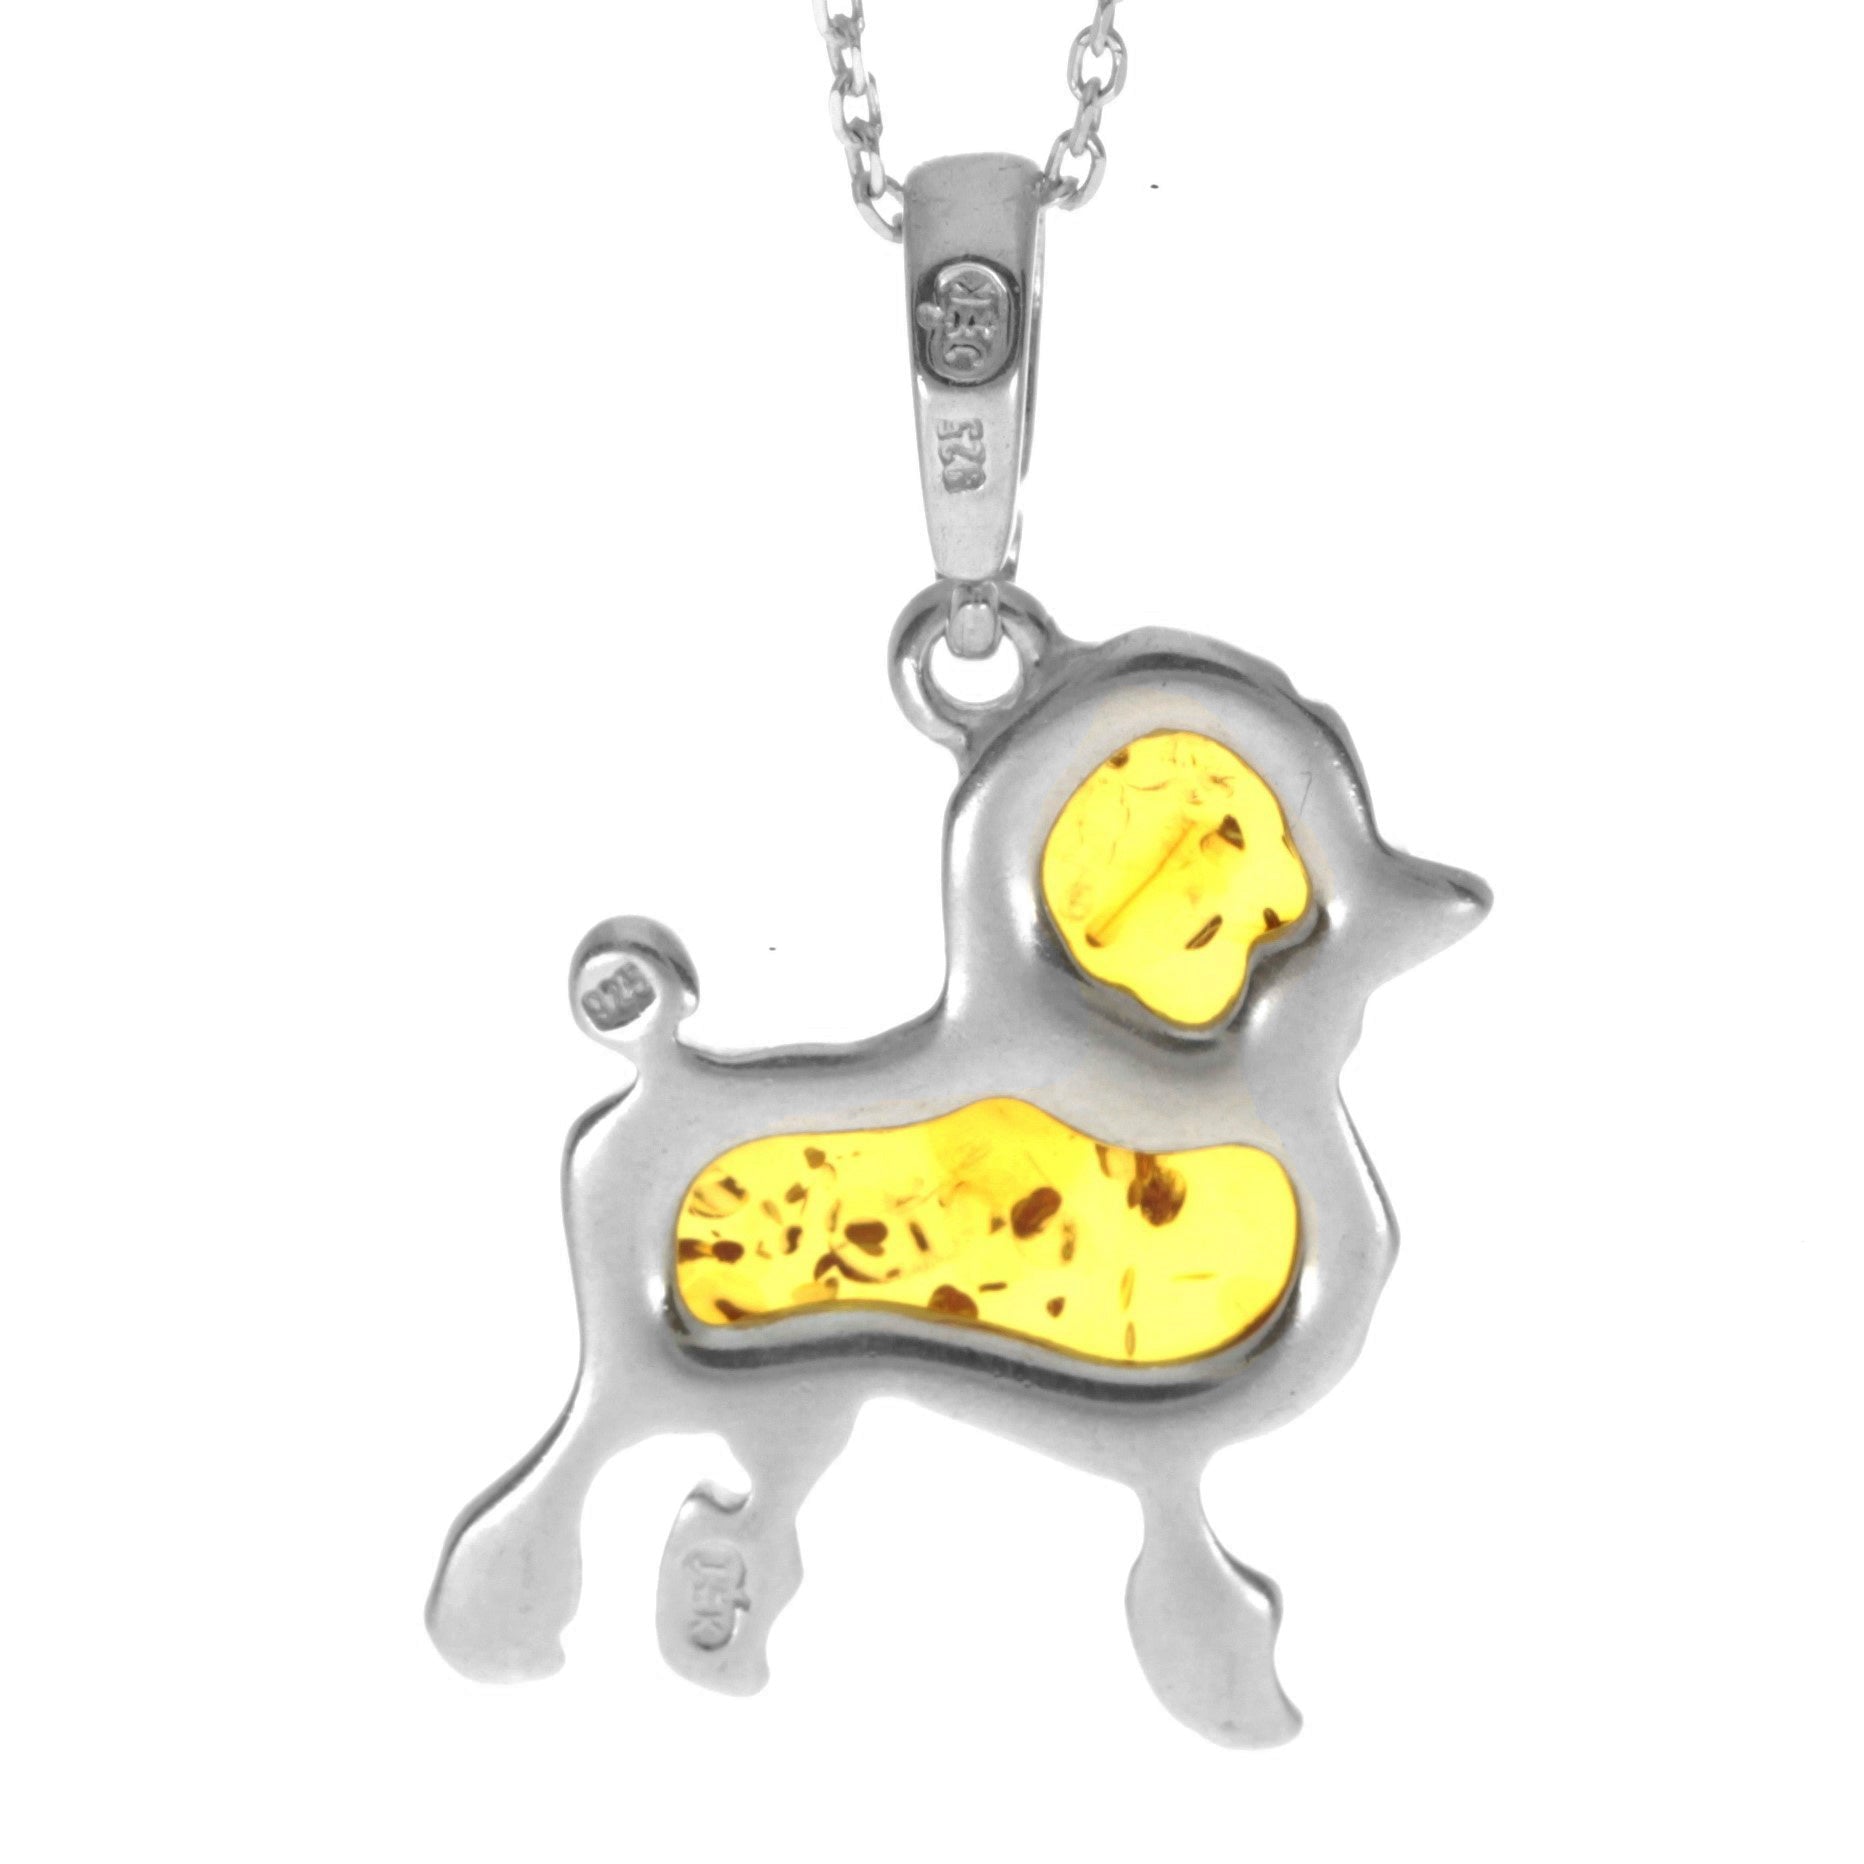 925 Sterling Silver & Baltic Amber Poodle Dog Pendant - AD220